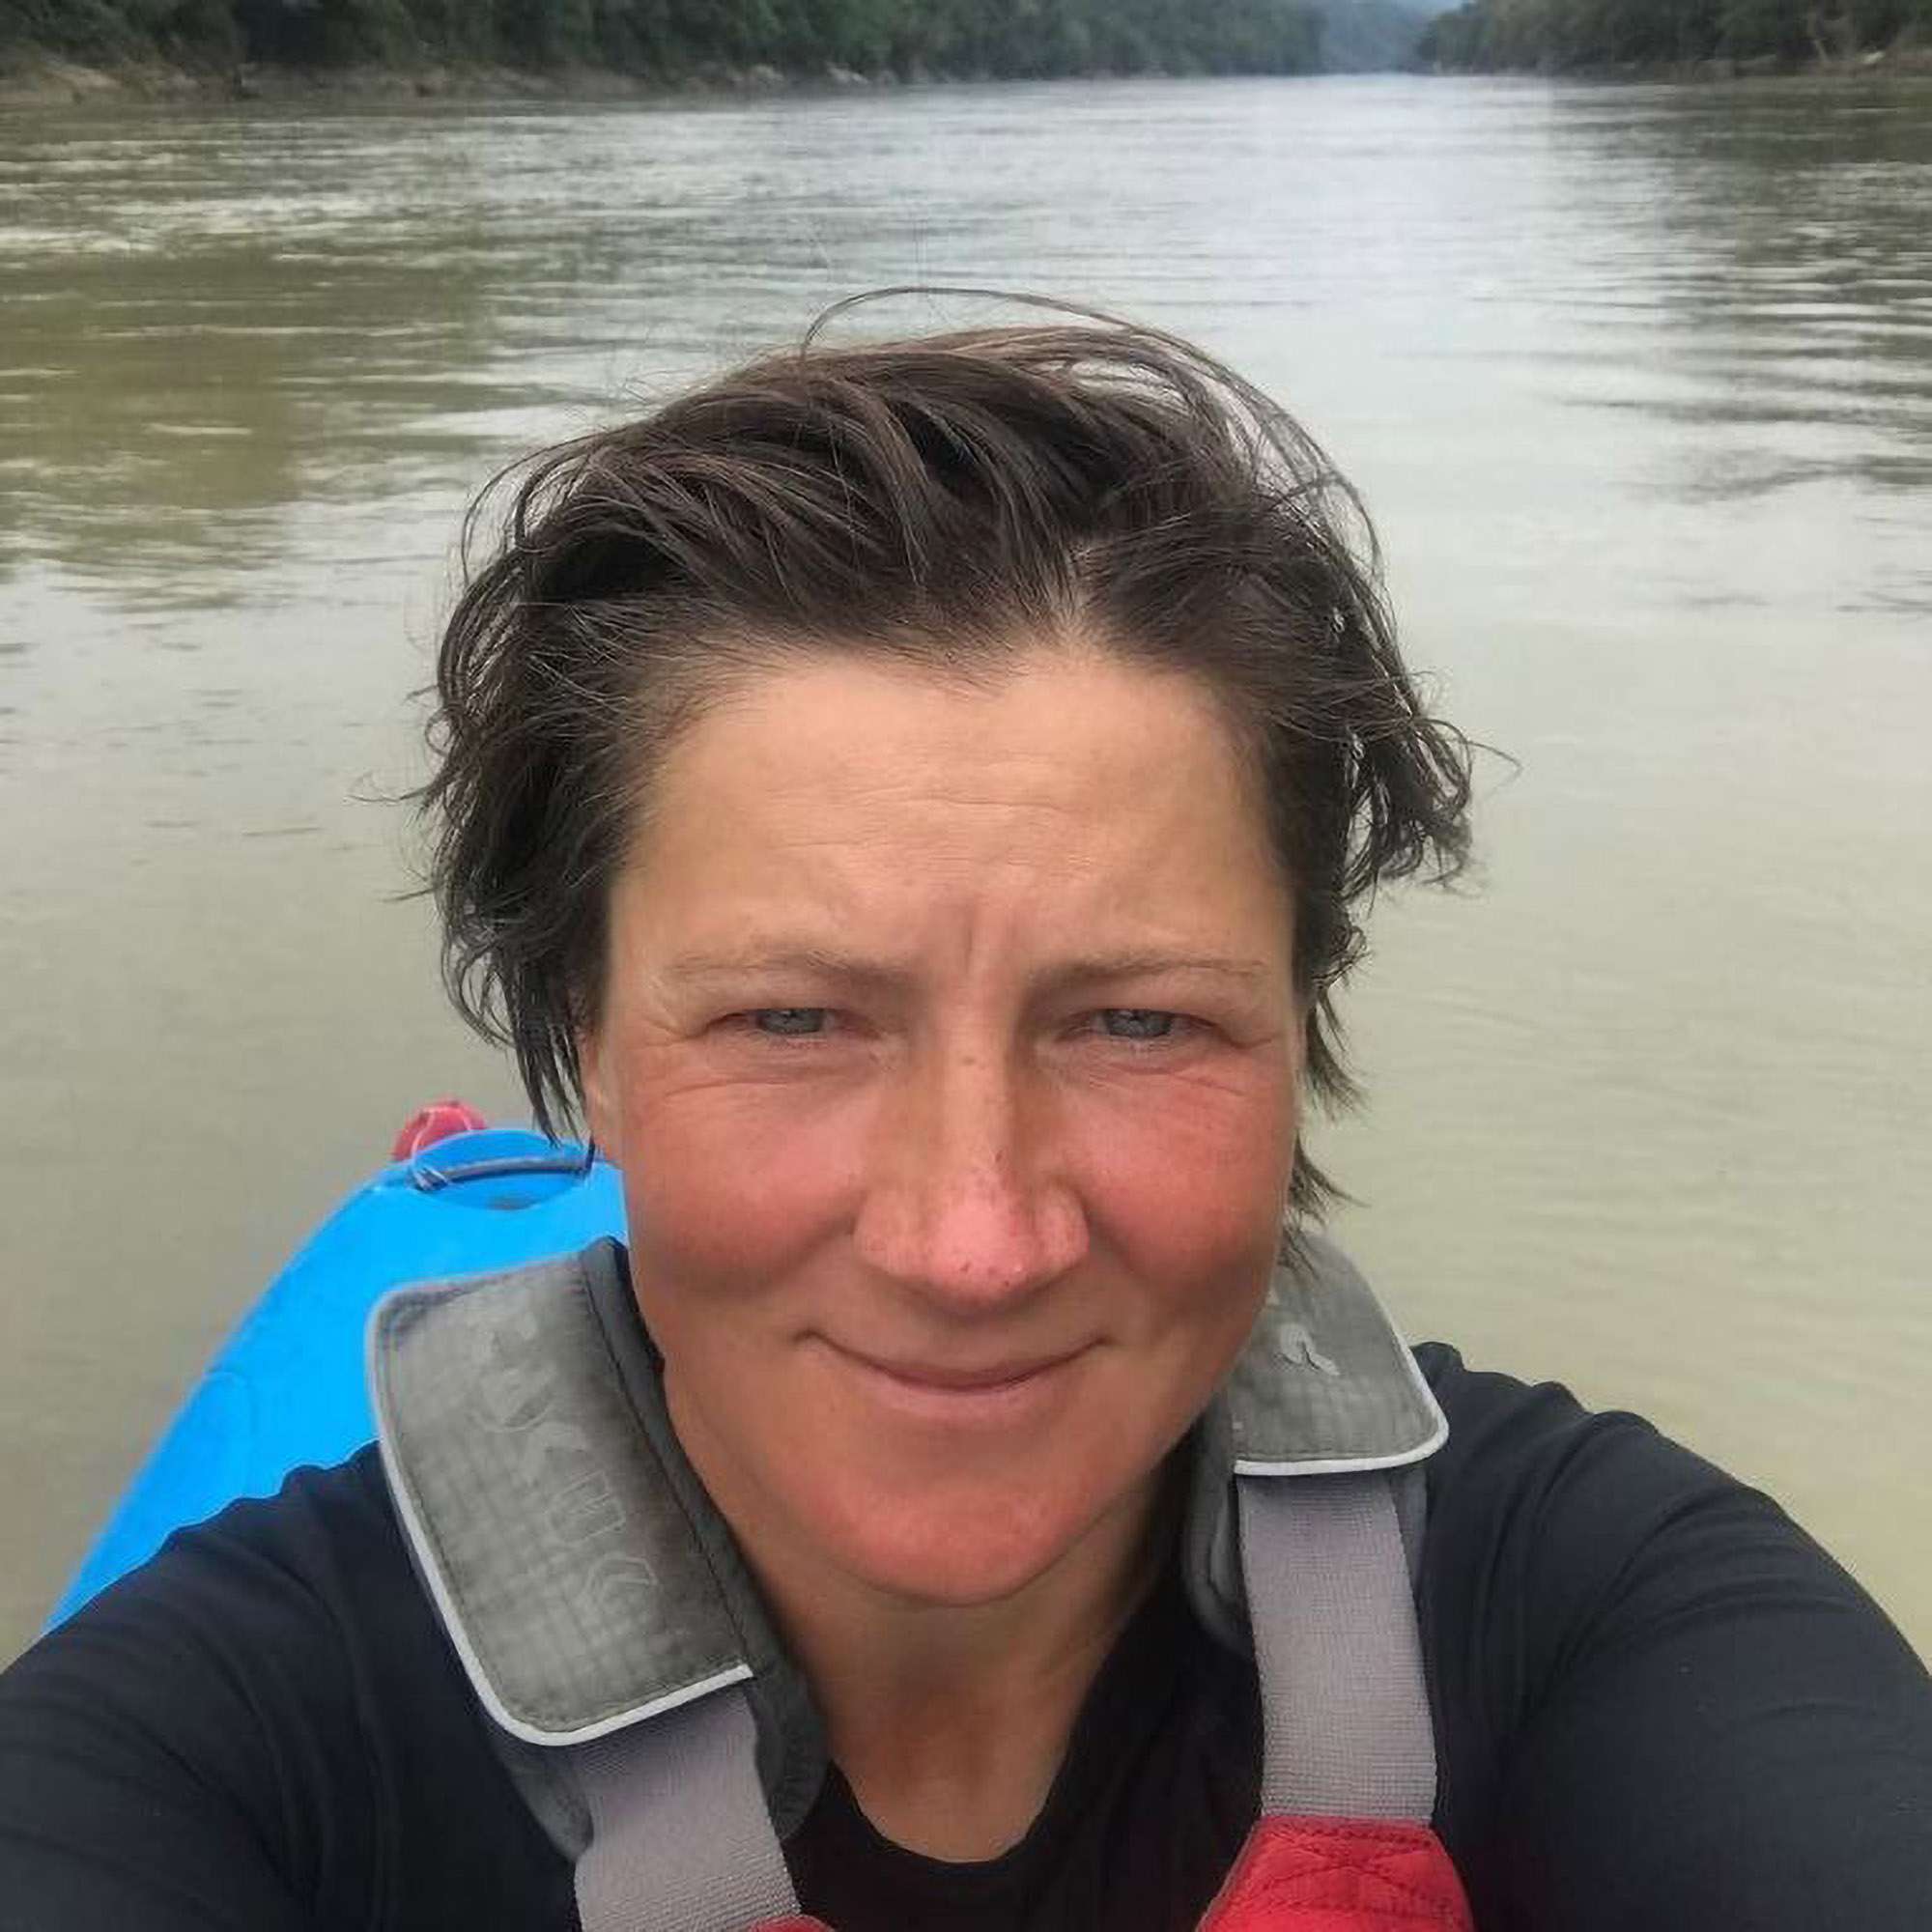 Read more about the article BRIT KAYAKER’S KILLER SEIZED: Fugitive Who Raped And Murdered Woman Adventurer Nabbed Taking Daughter To Hospital